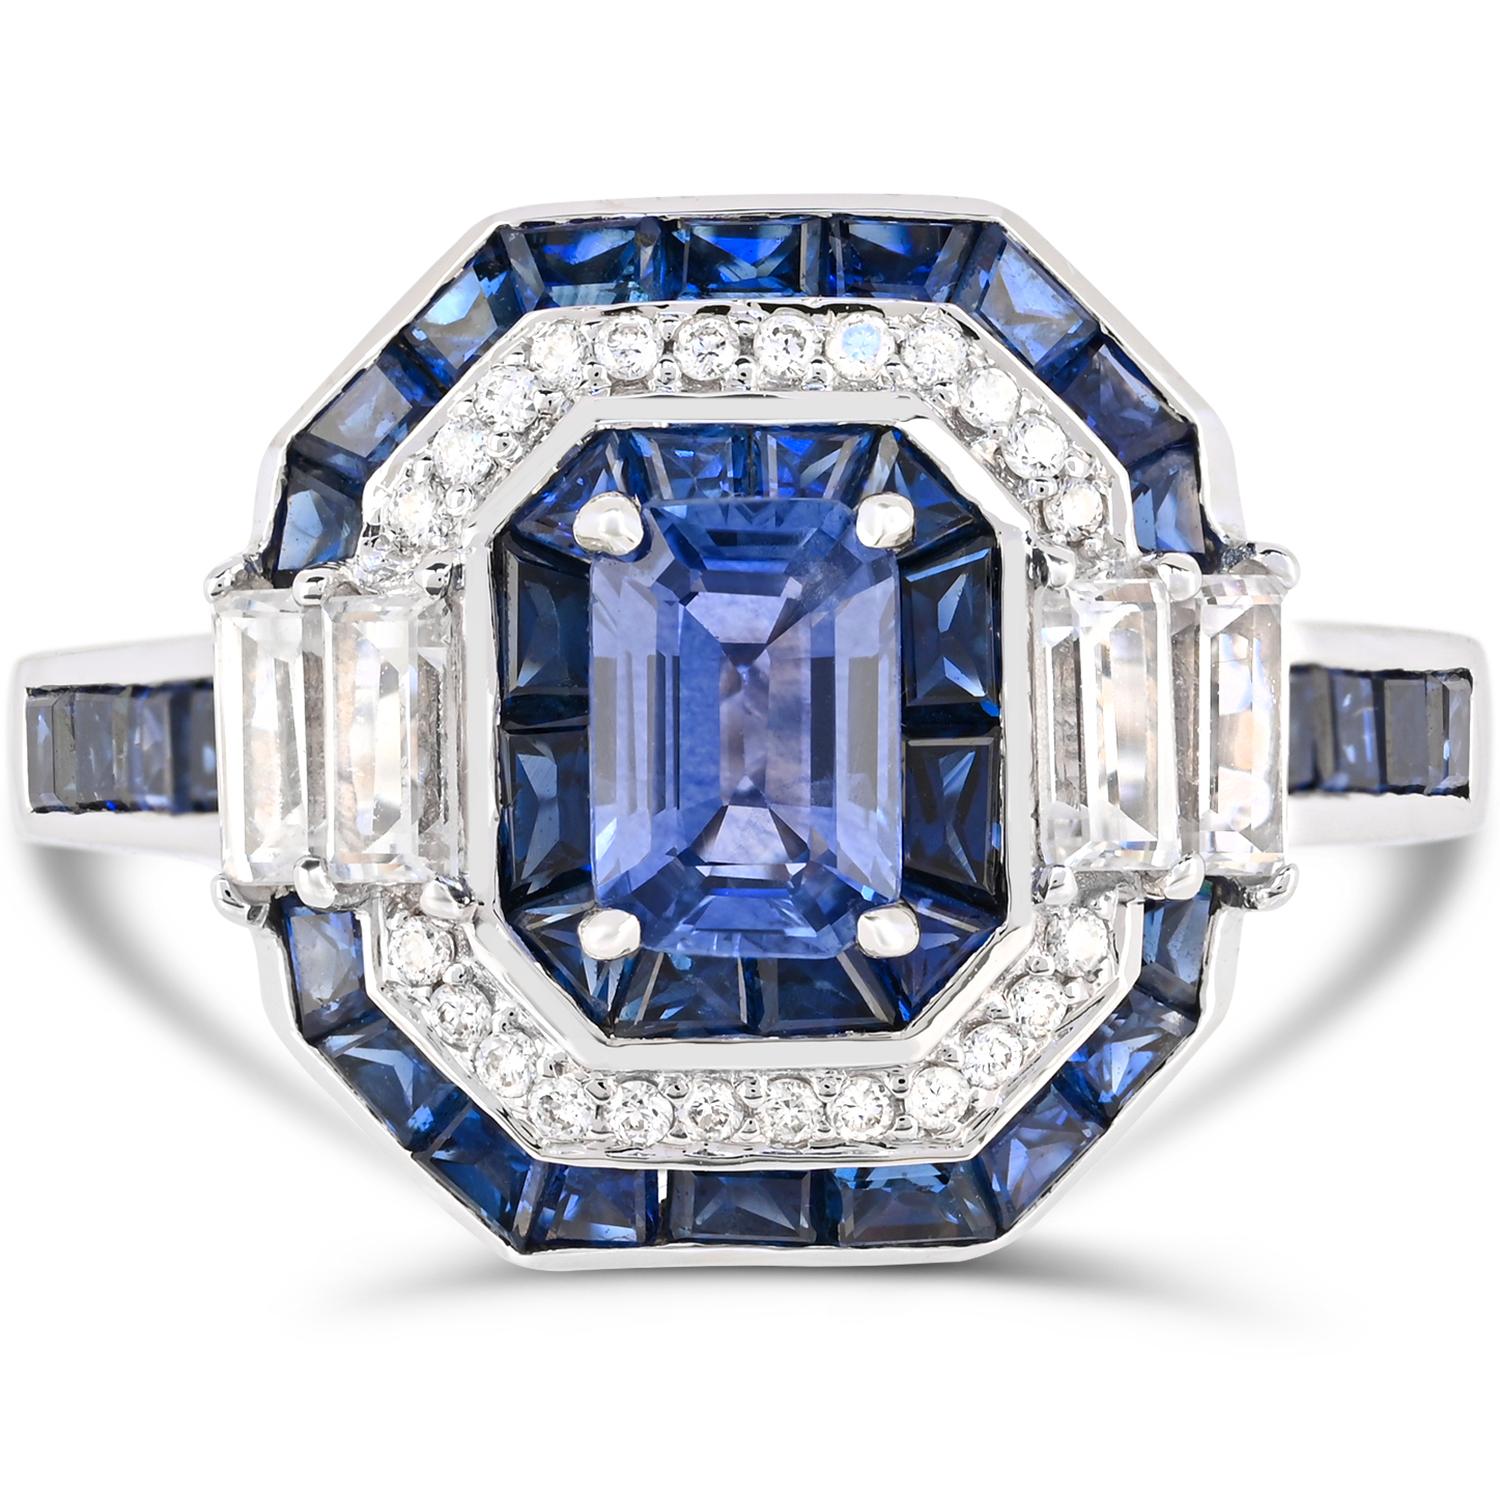 Inspired with Art Deco, this cocktail ring is an epitome of elegance.  This one-of-a-kind ring is set in 14K white gold and centered with 0.70 carat Emerald-cut Blue Sapphire, surrounded by glistening sparkly round brilliant-cut diamond accents and